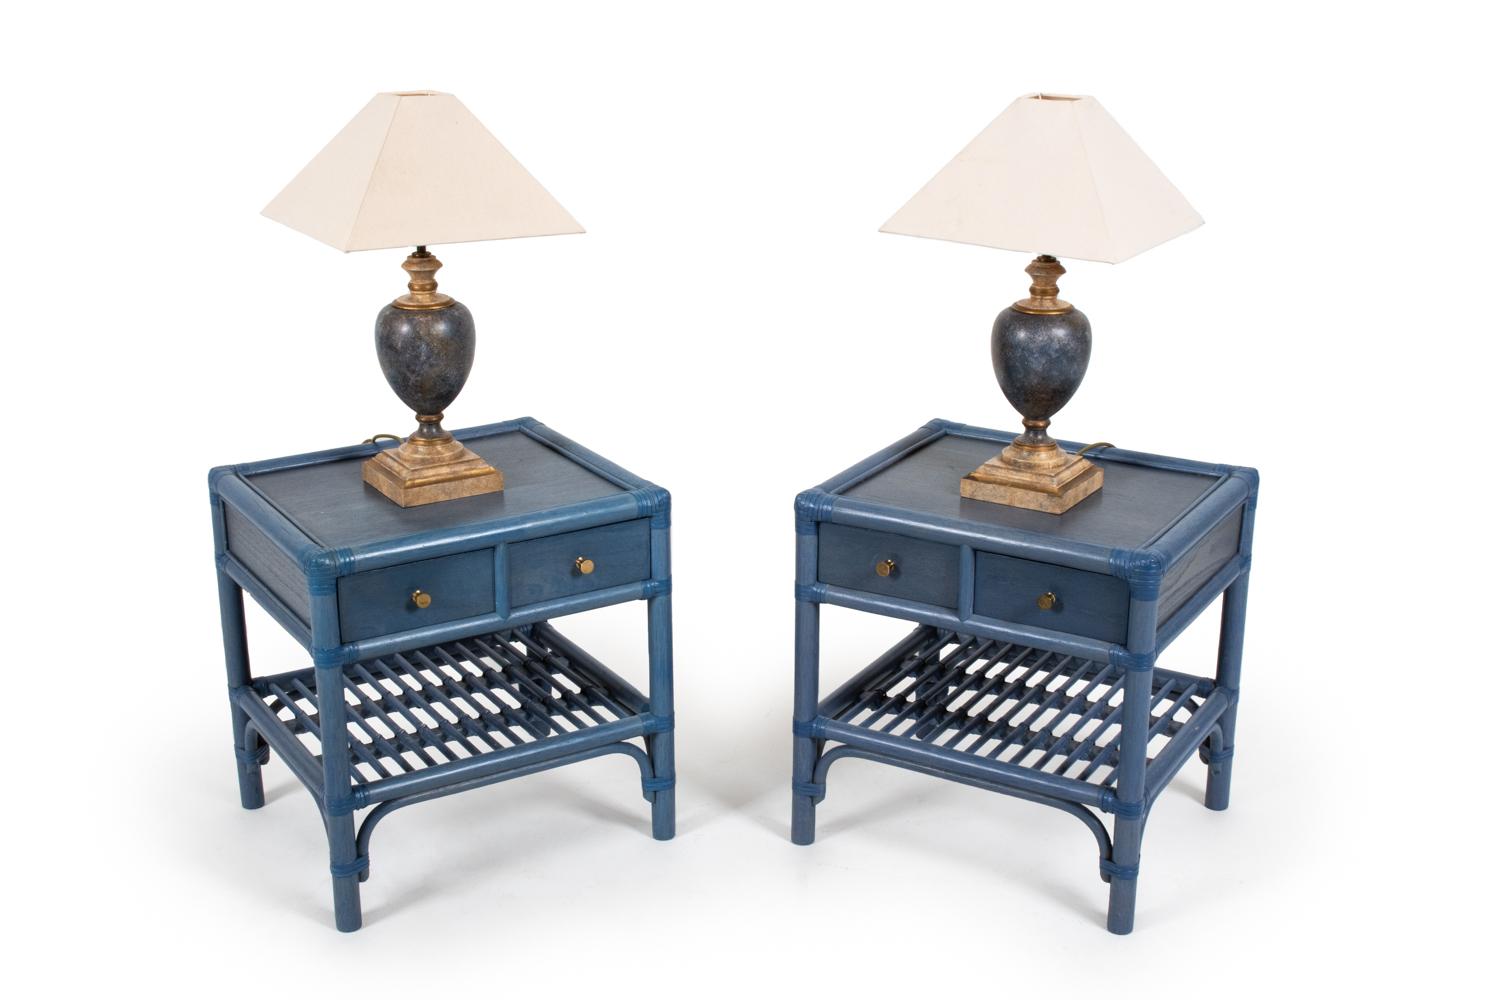 Get a head start on your decorating with a full suite of coastal inspired furniture including a pair of bamboo and rattan nightstands or end tables in coastal blue stain, with two drawers, manufactured by Dux of Sweden, c. 1970's. Complementary to